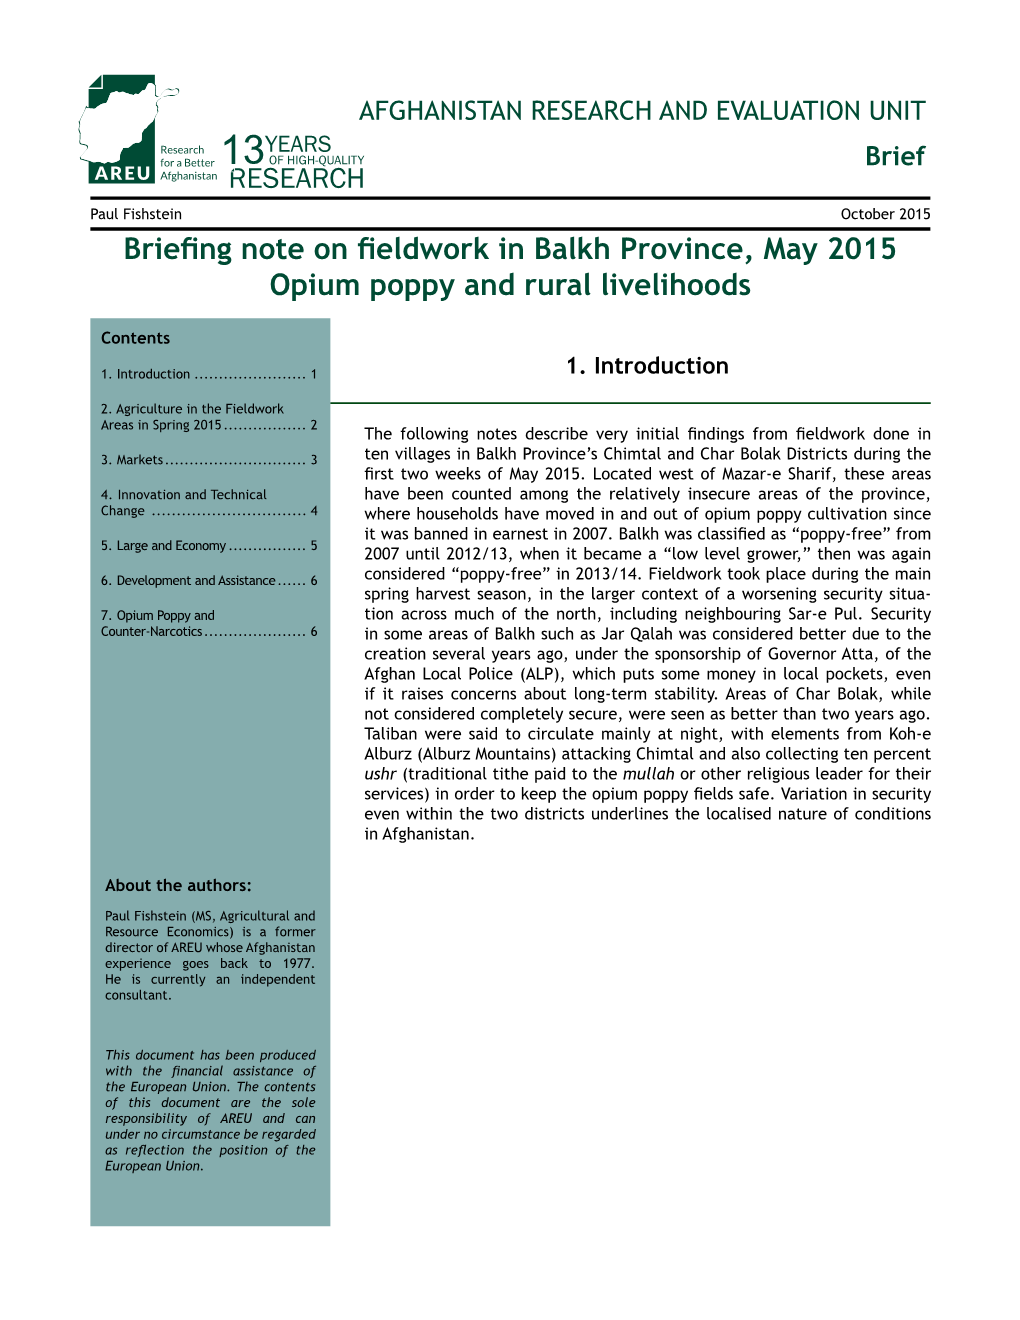 Briefing Note on Fieldwork in Balkh Province, May 2015 Opium Poppy and Rural Livelihoods